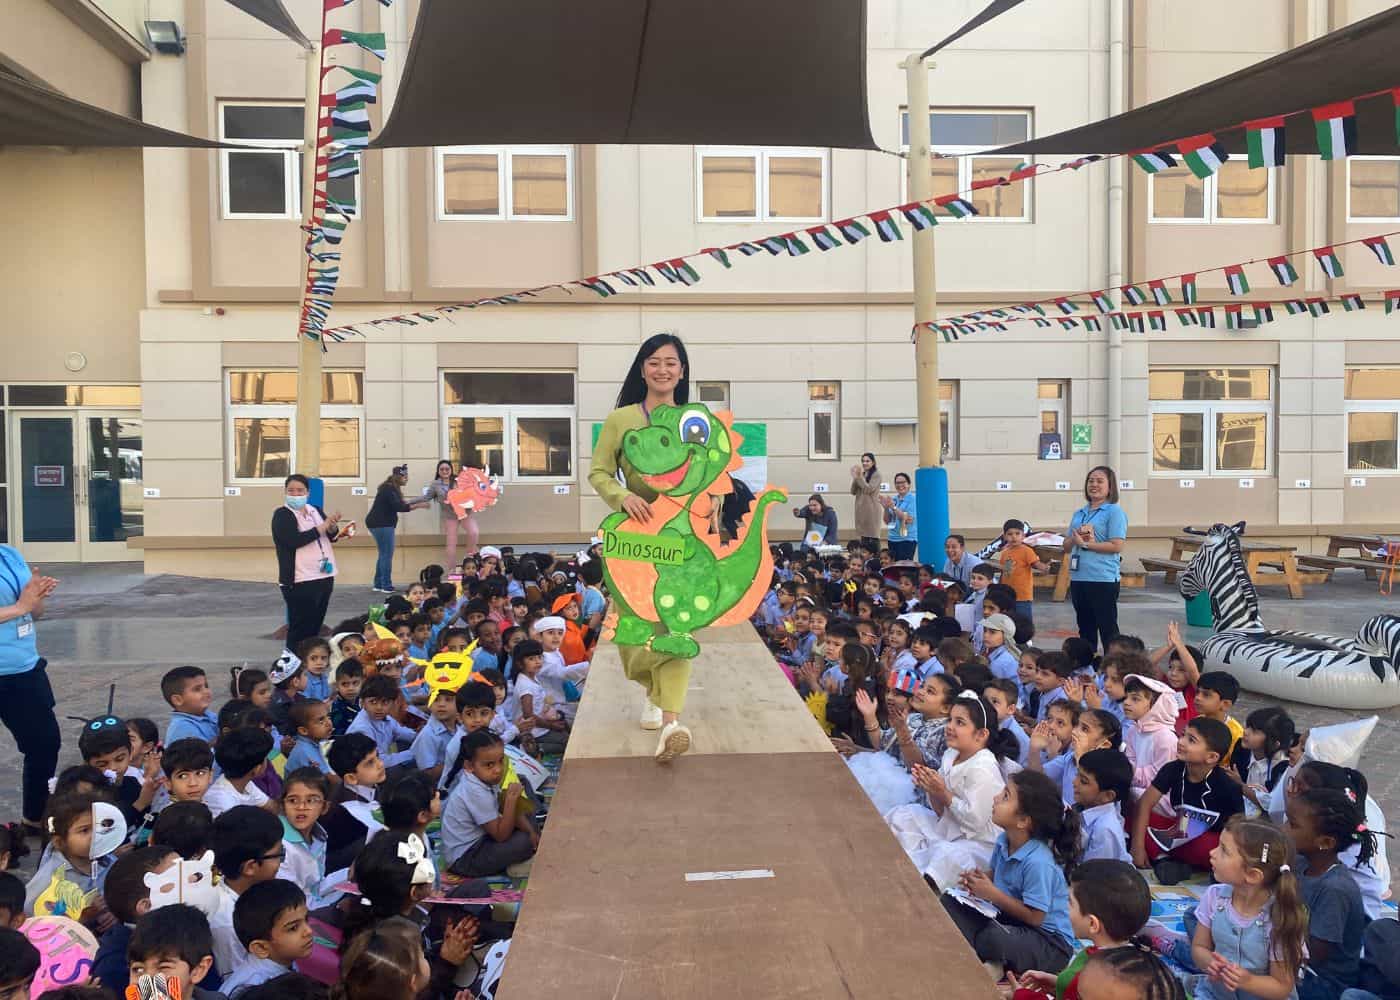 Elementary students and teachers of Abu Dhabi International School at the Vocabulary Parade event